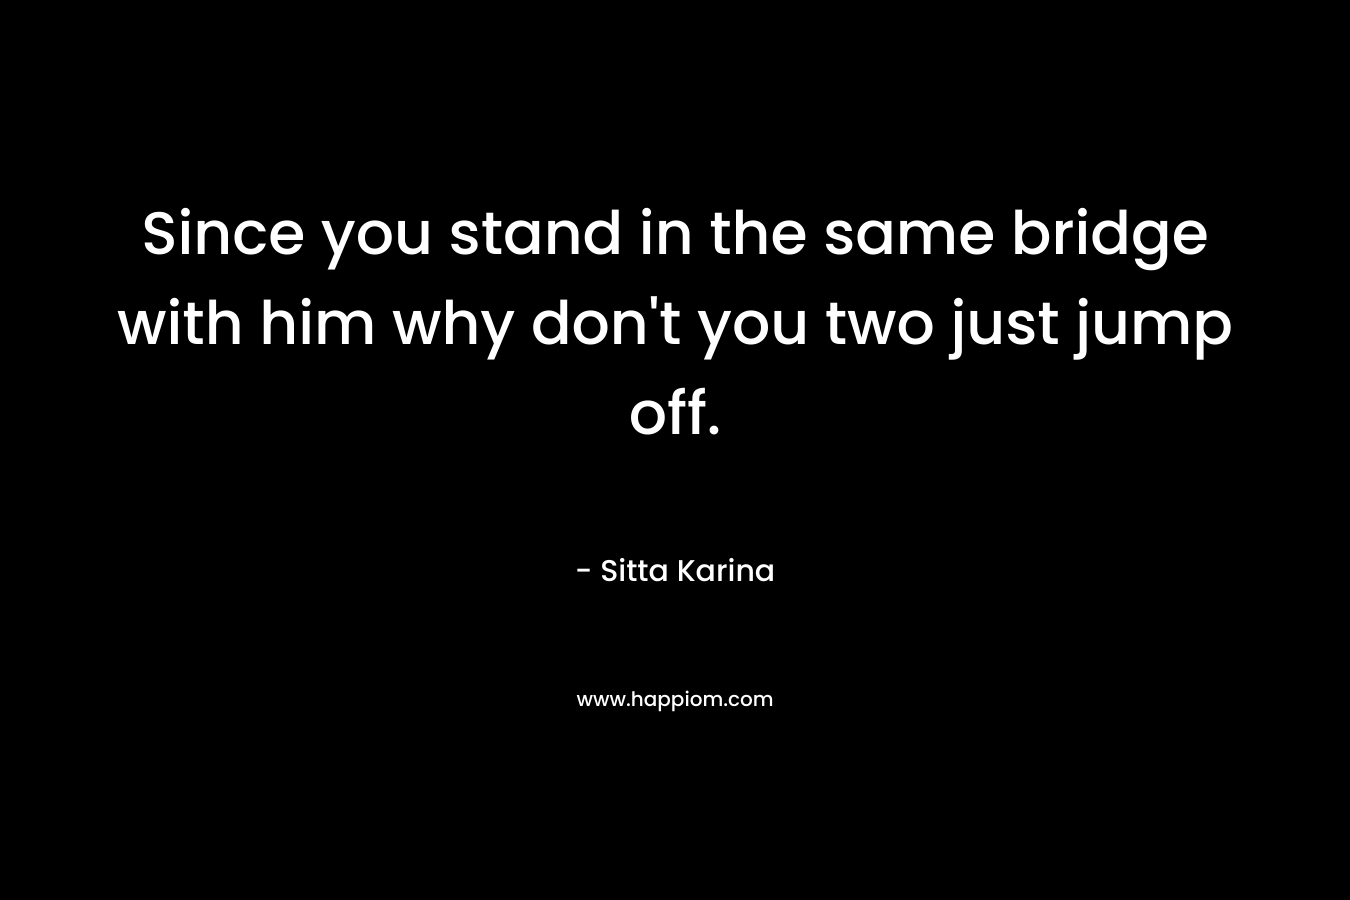 Since you stand in the same bridge with him why don’t you two just jump off. – Sitta Karina